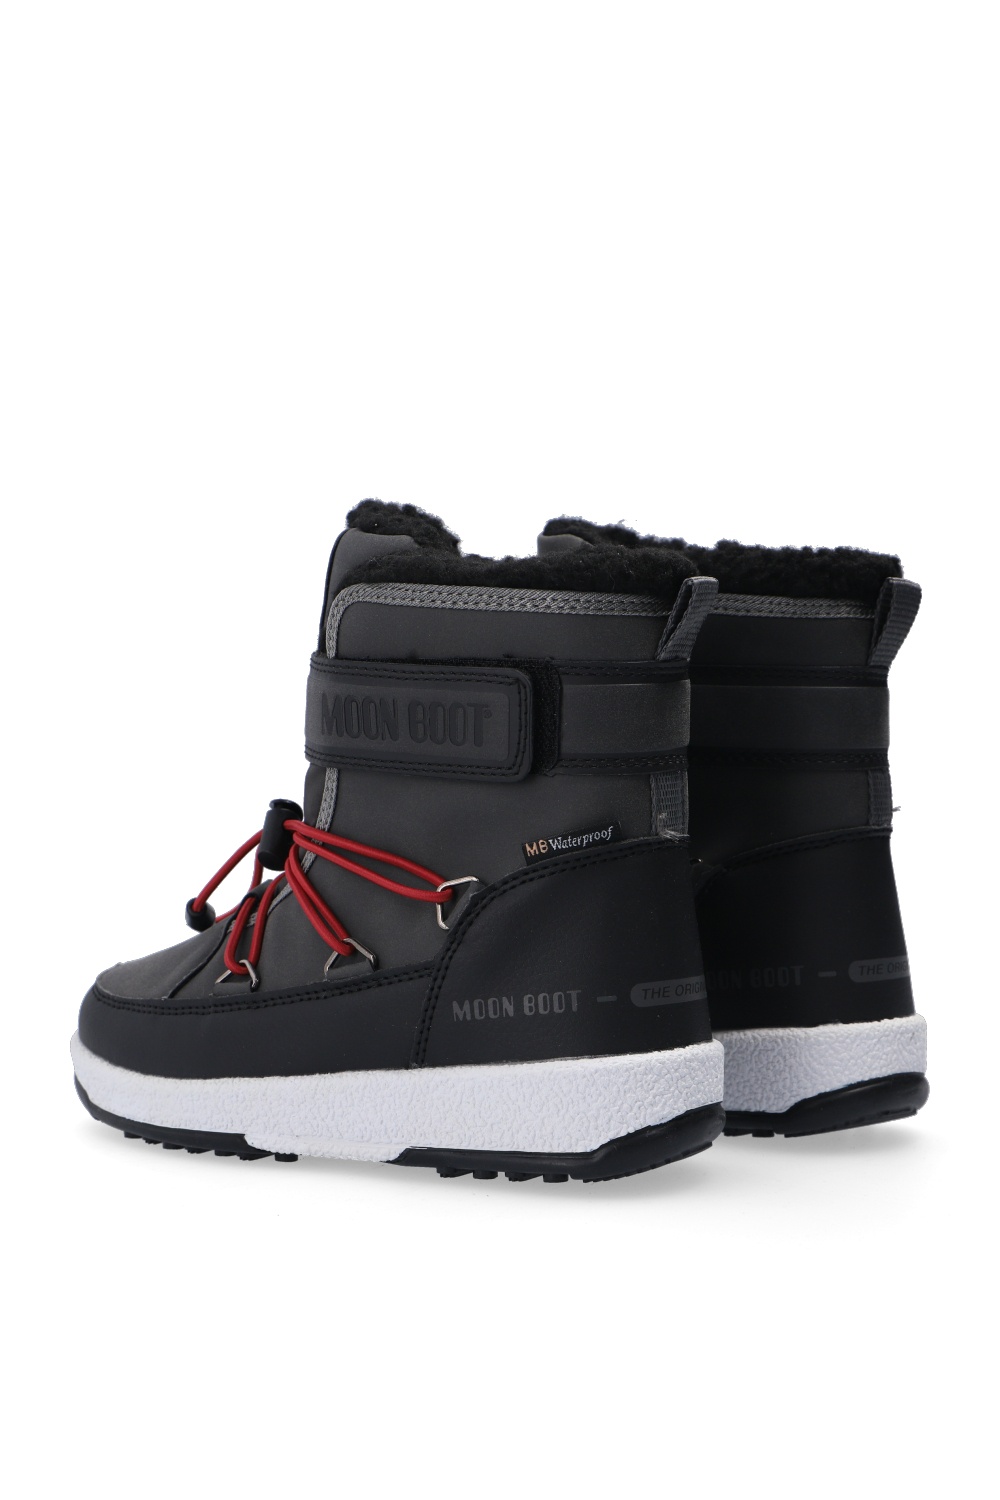 Uitdaging Wauw intern Kids's Kids shoes (25 | Moon Boot Kids 'Jr Boy' snow boots | 39) -  StclaircomoShops | sneaker model even further with another custom concept  that sets these babies on fire figuratively